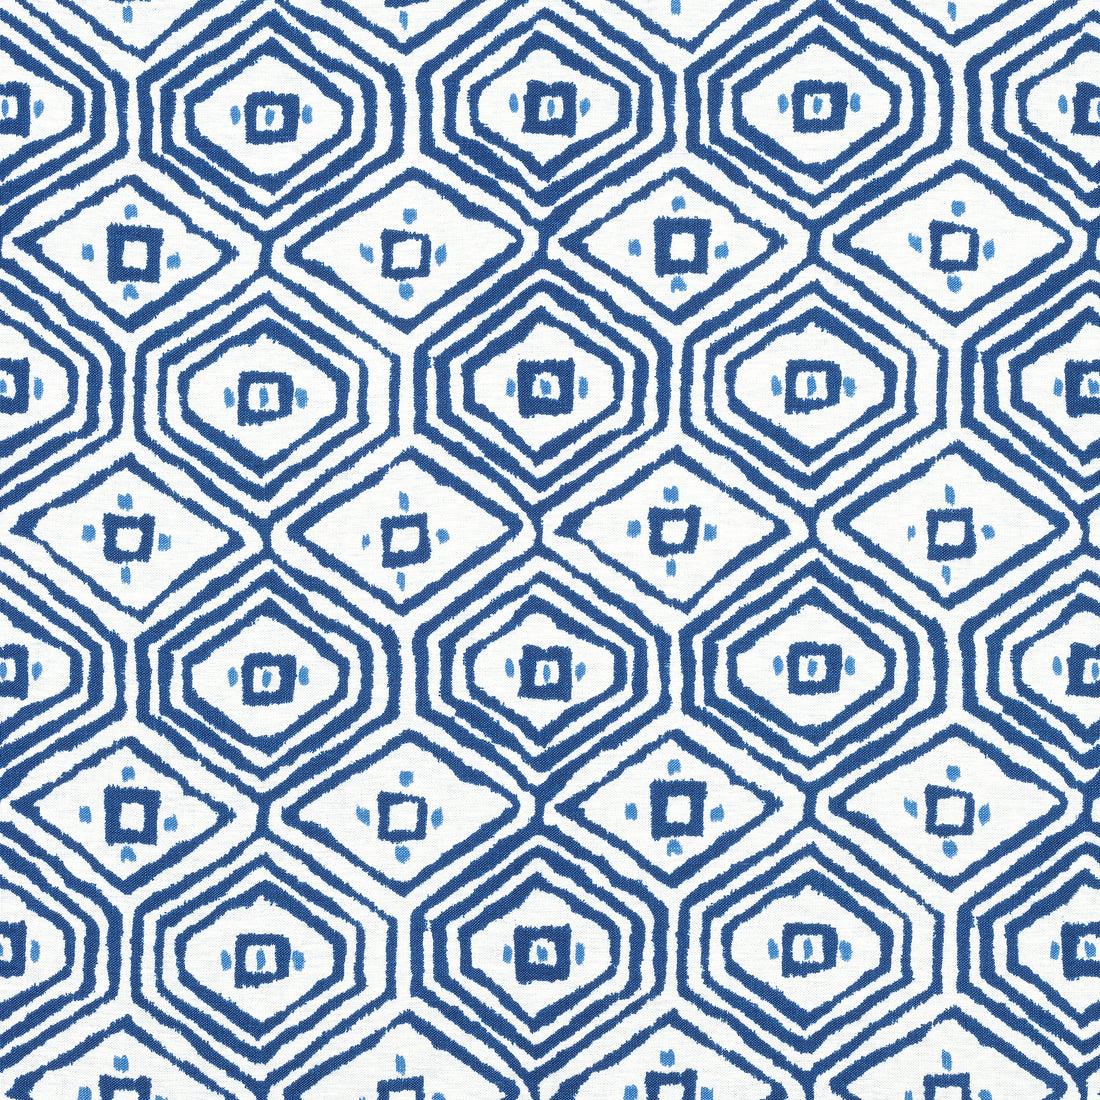 Pass-A-Grille fabric in navy color - pattern number F910617 - by Thibaut in the Ceylon collection